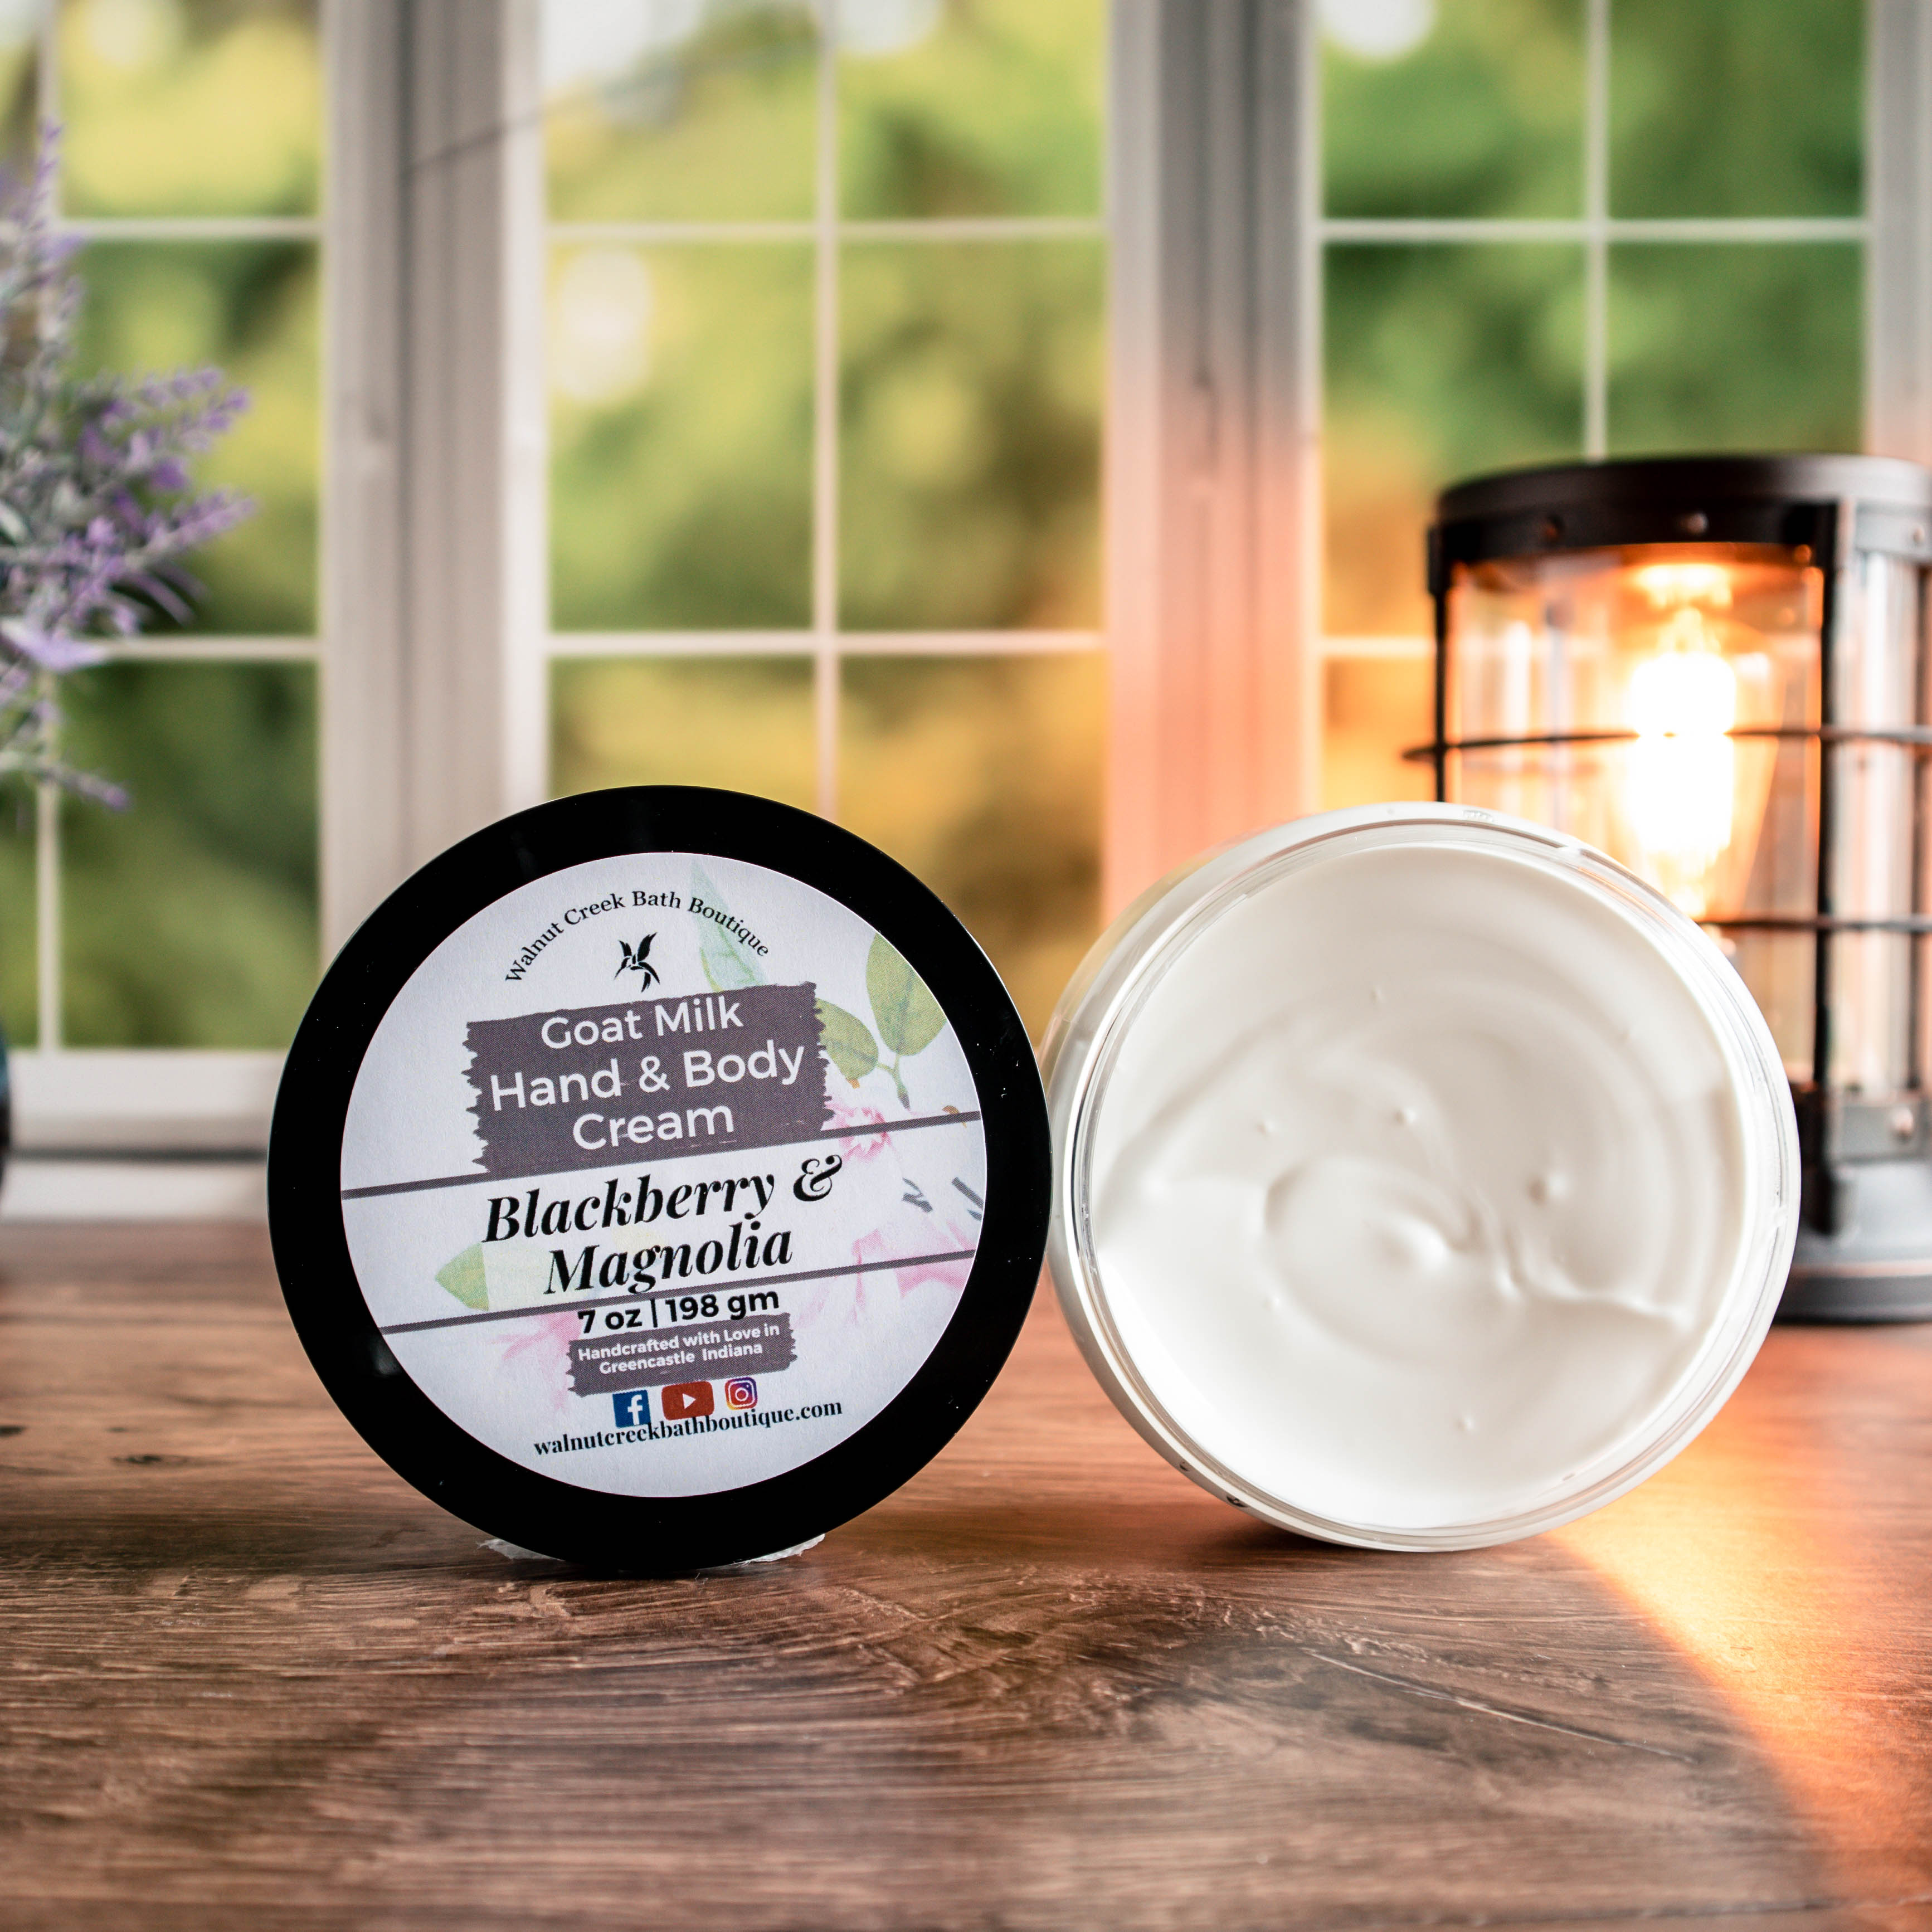 7 oz Blackberry &amp; Magnolia cream, one with top showing a pretty label of pink orchid flowers, next to this is an open jar showing contents. There is a lush green background behind a window, a light in the back right and a pretty vase with flowers in the back left.